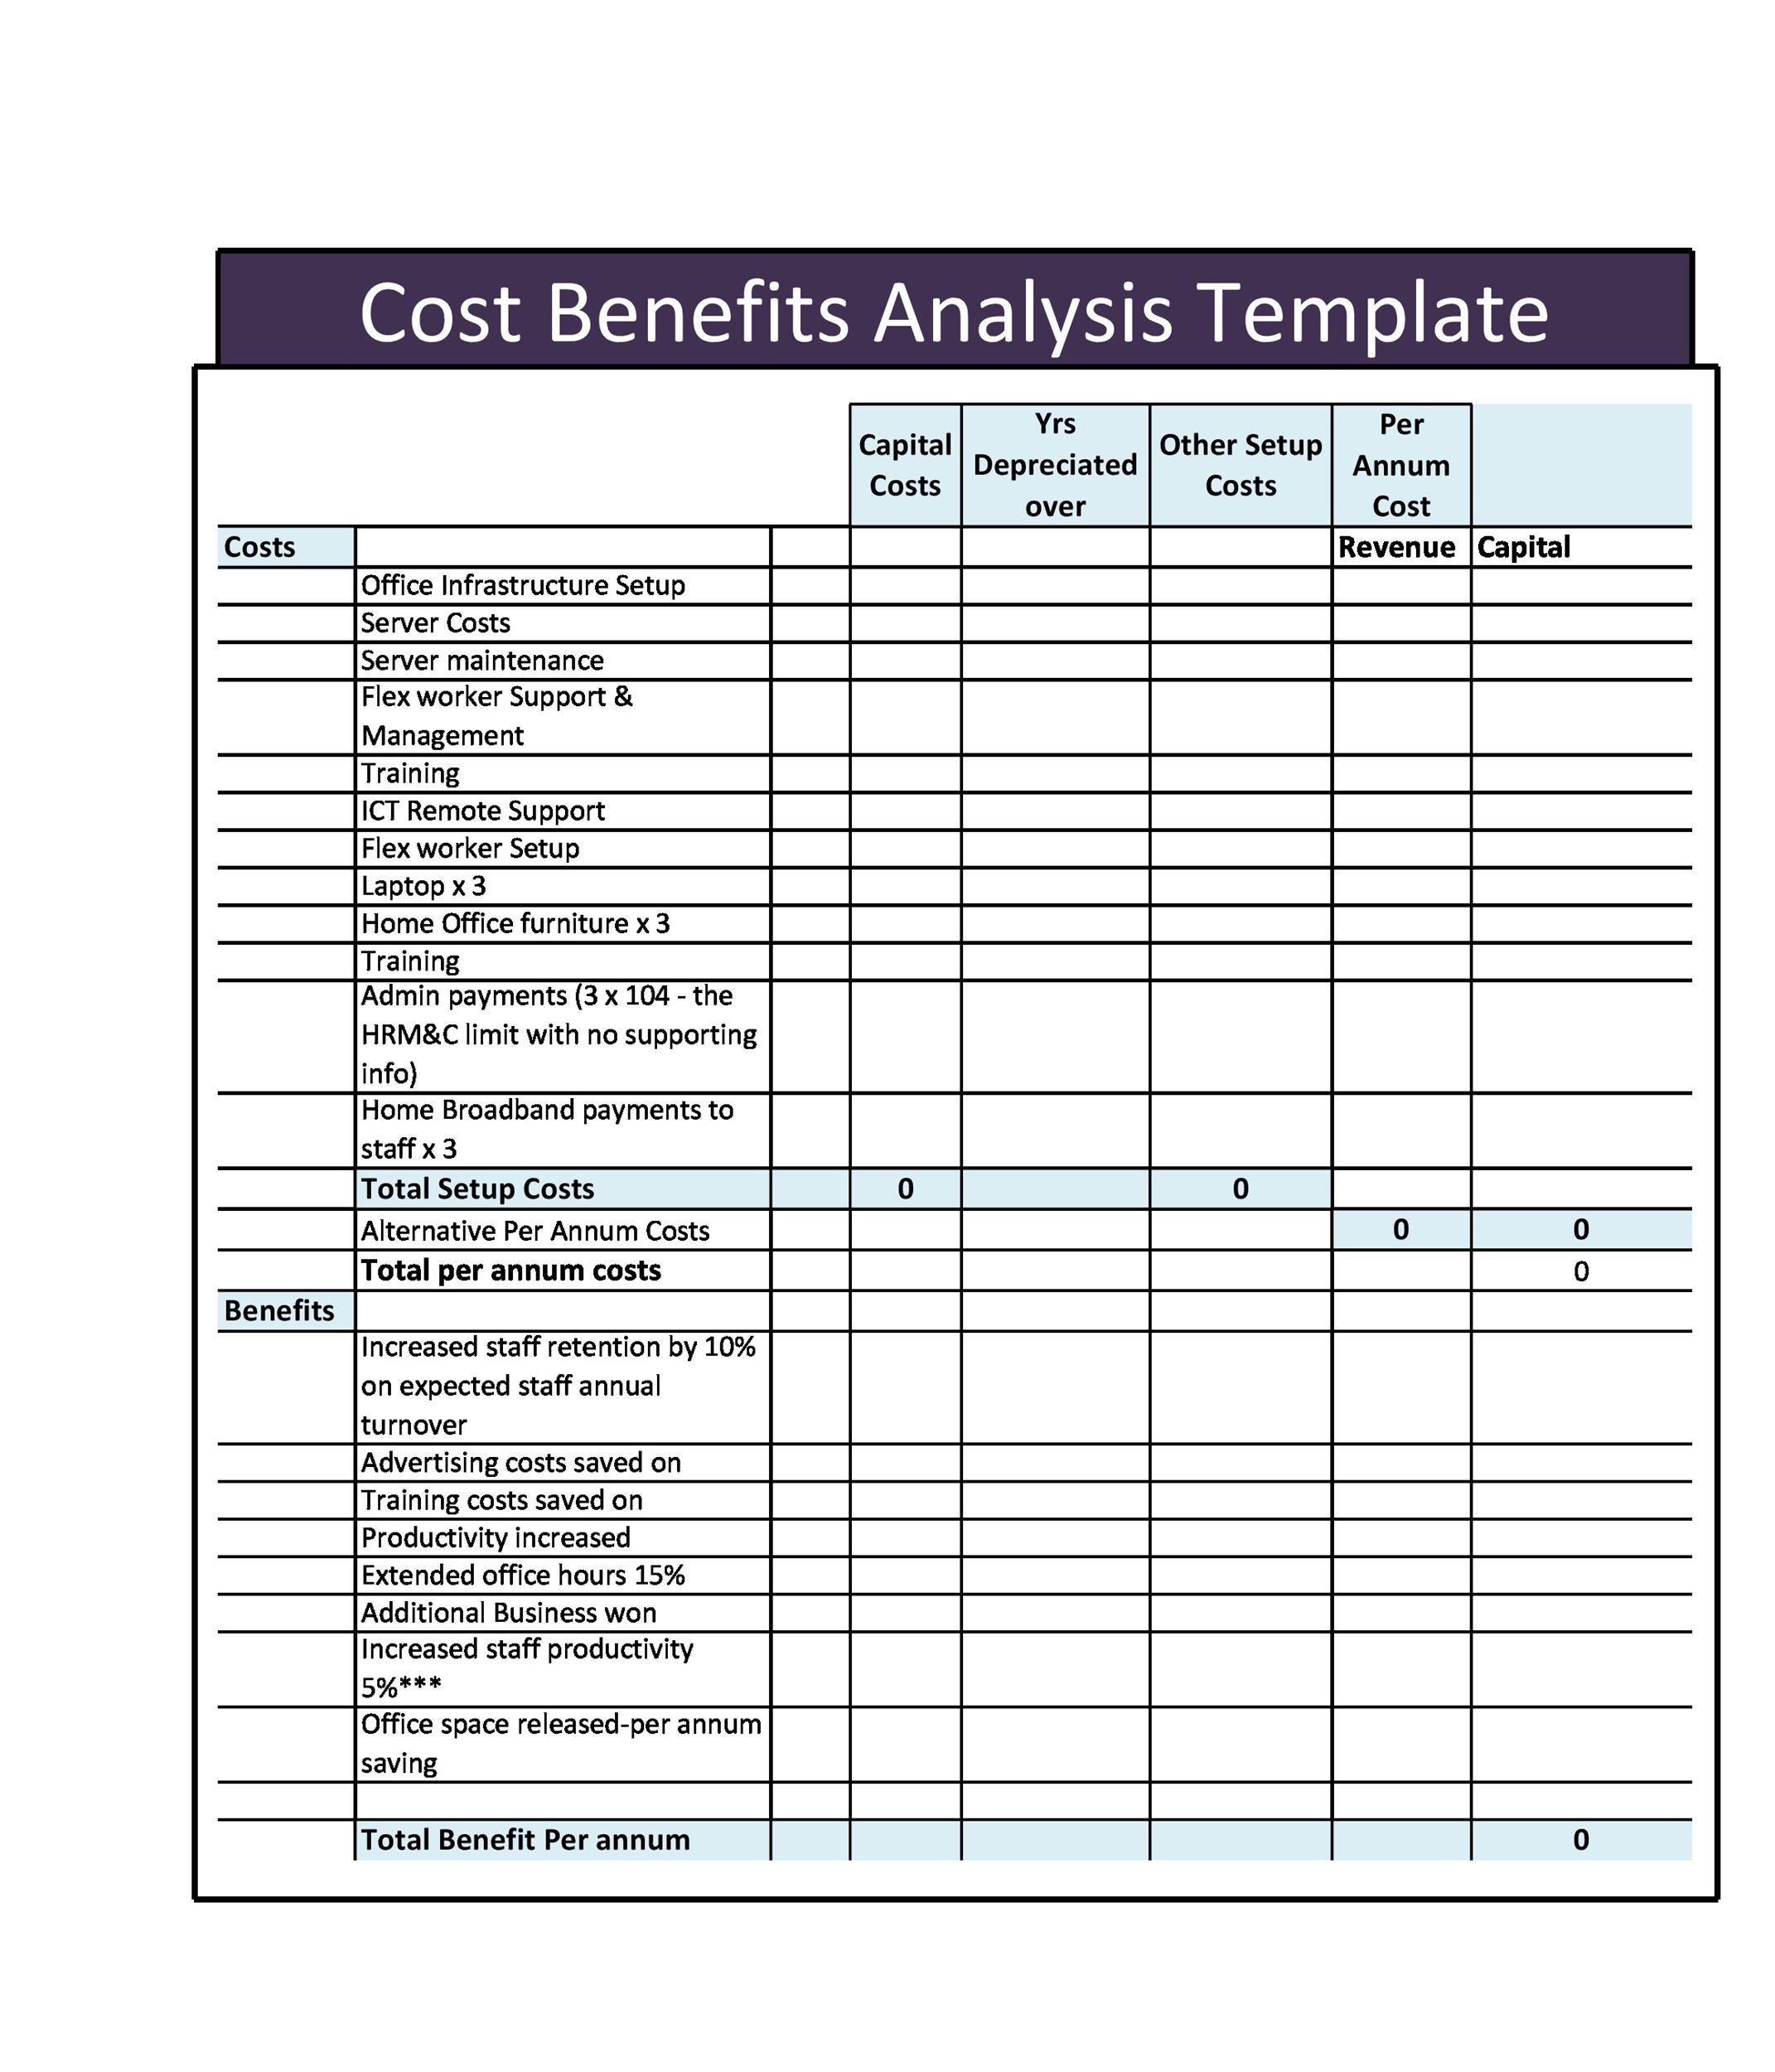 40  Cost Benefit Analysis Templates Examples ᐅ TemplateLab